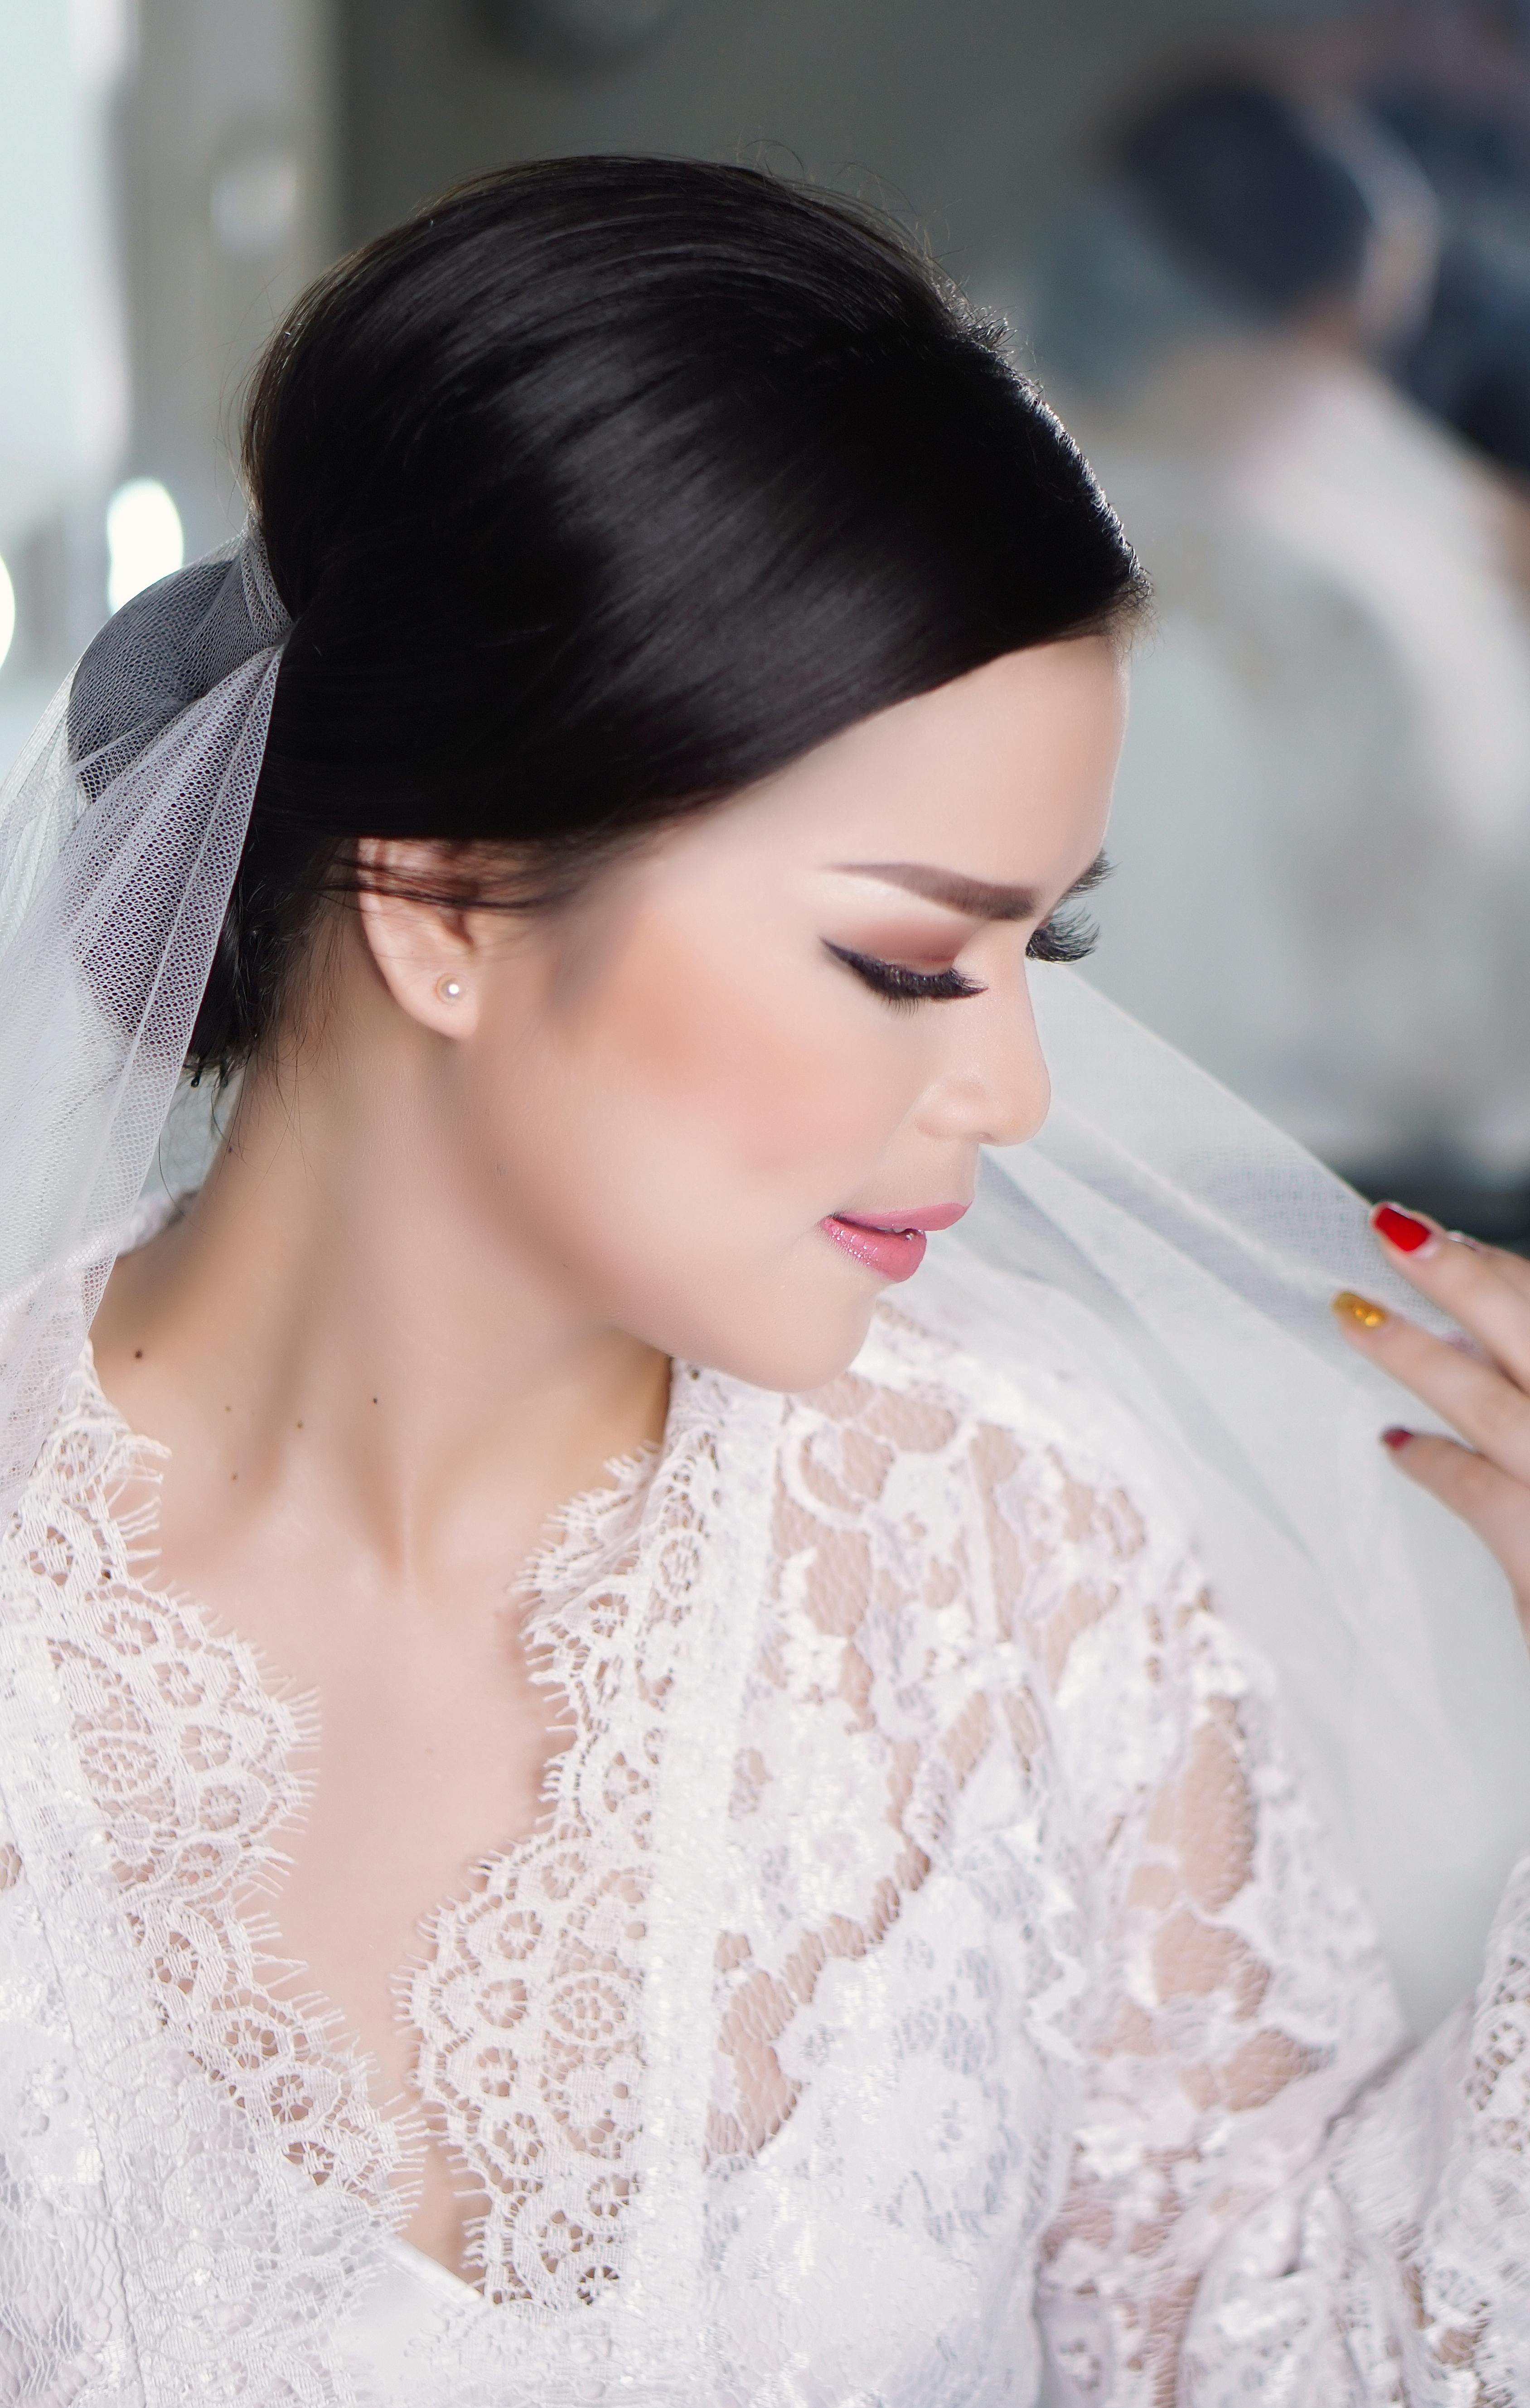 Free stock photo of #bride #makeup #gown